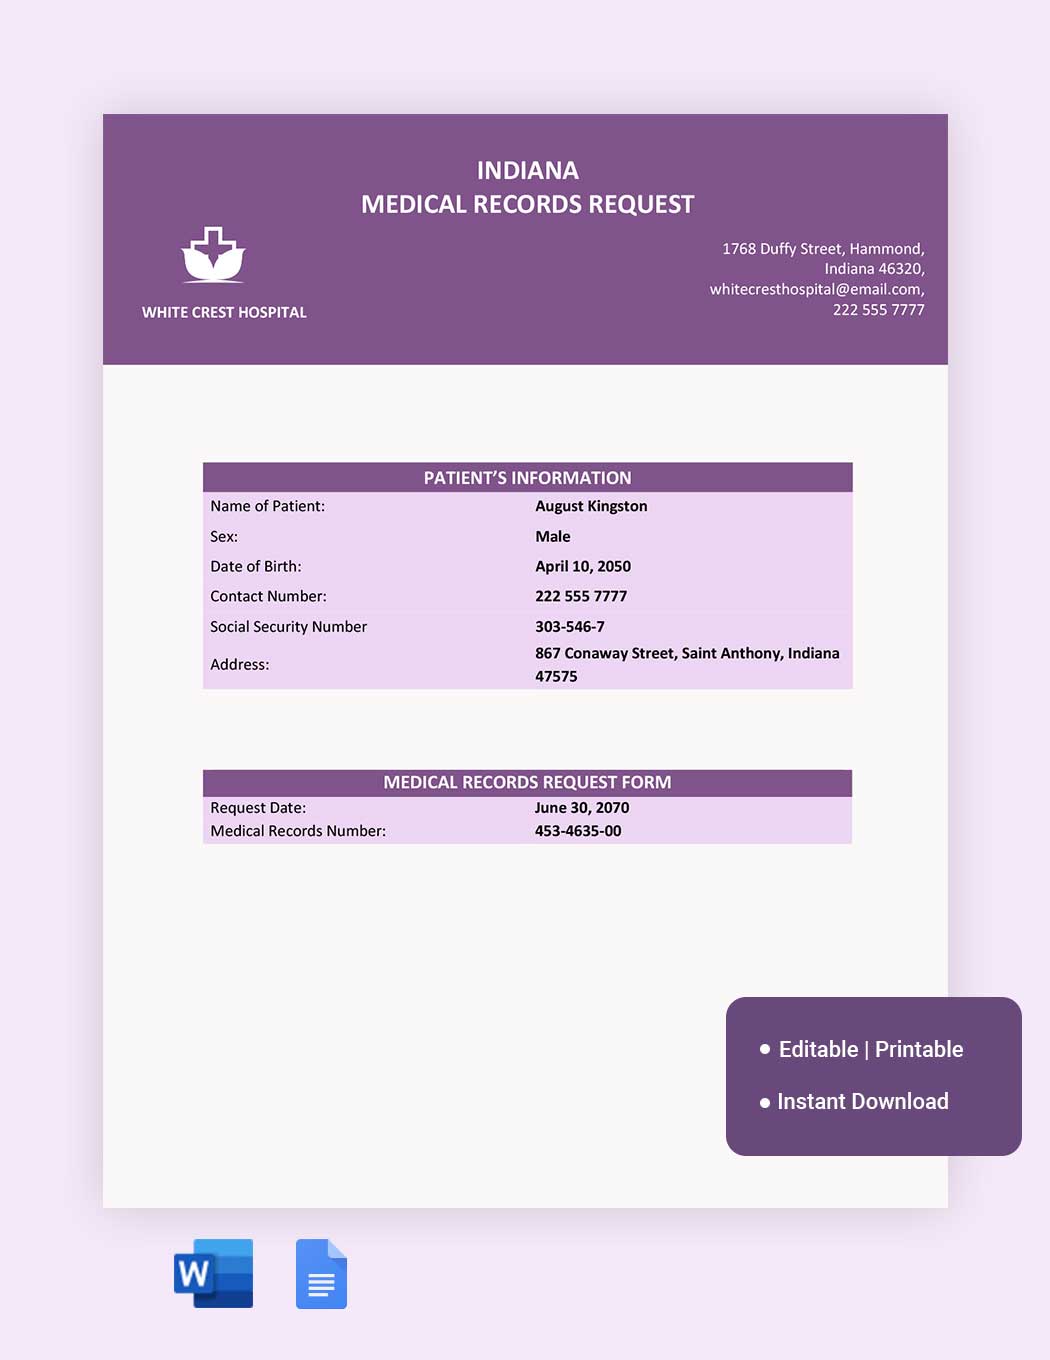 Indiana Medical Records Request Template in Word, Google Docs